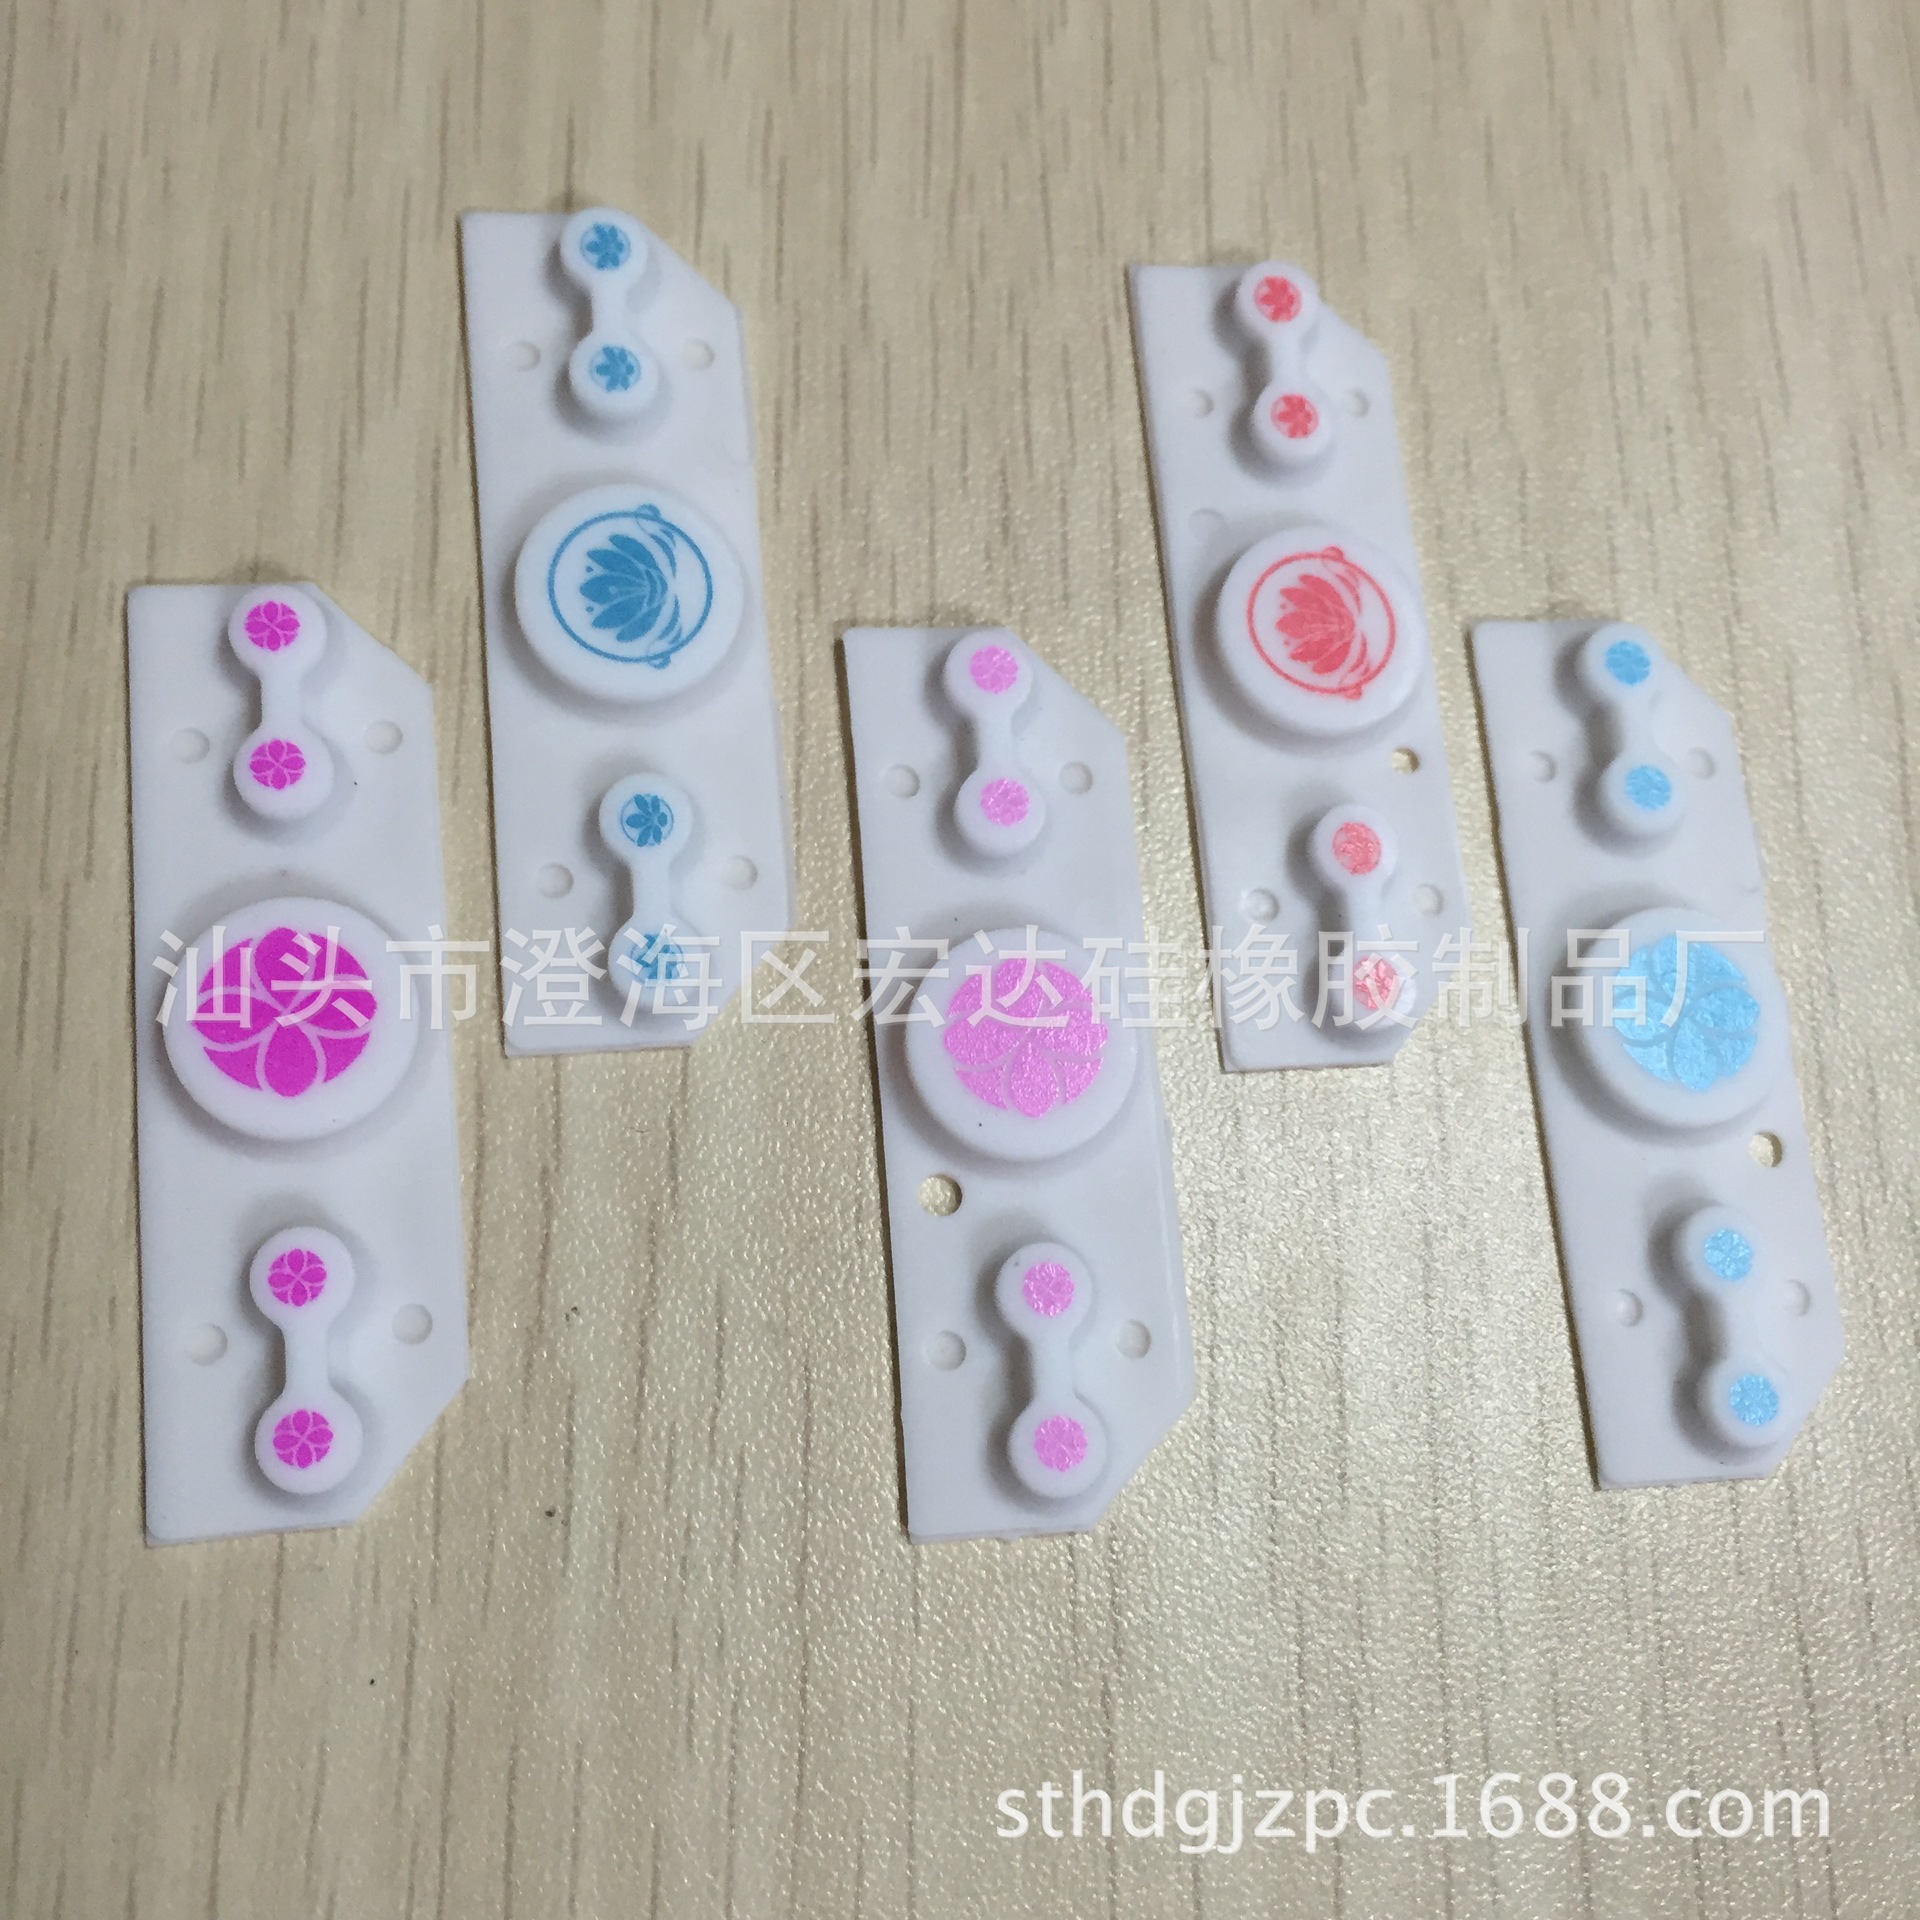 Production and Wholesale Toy Mobile Phone Button Toy Electronics Conductive Resin Button Button Undertake Processing